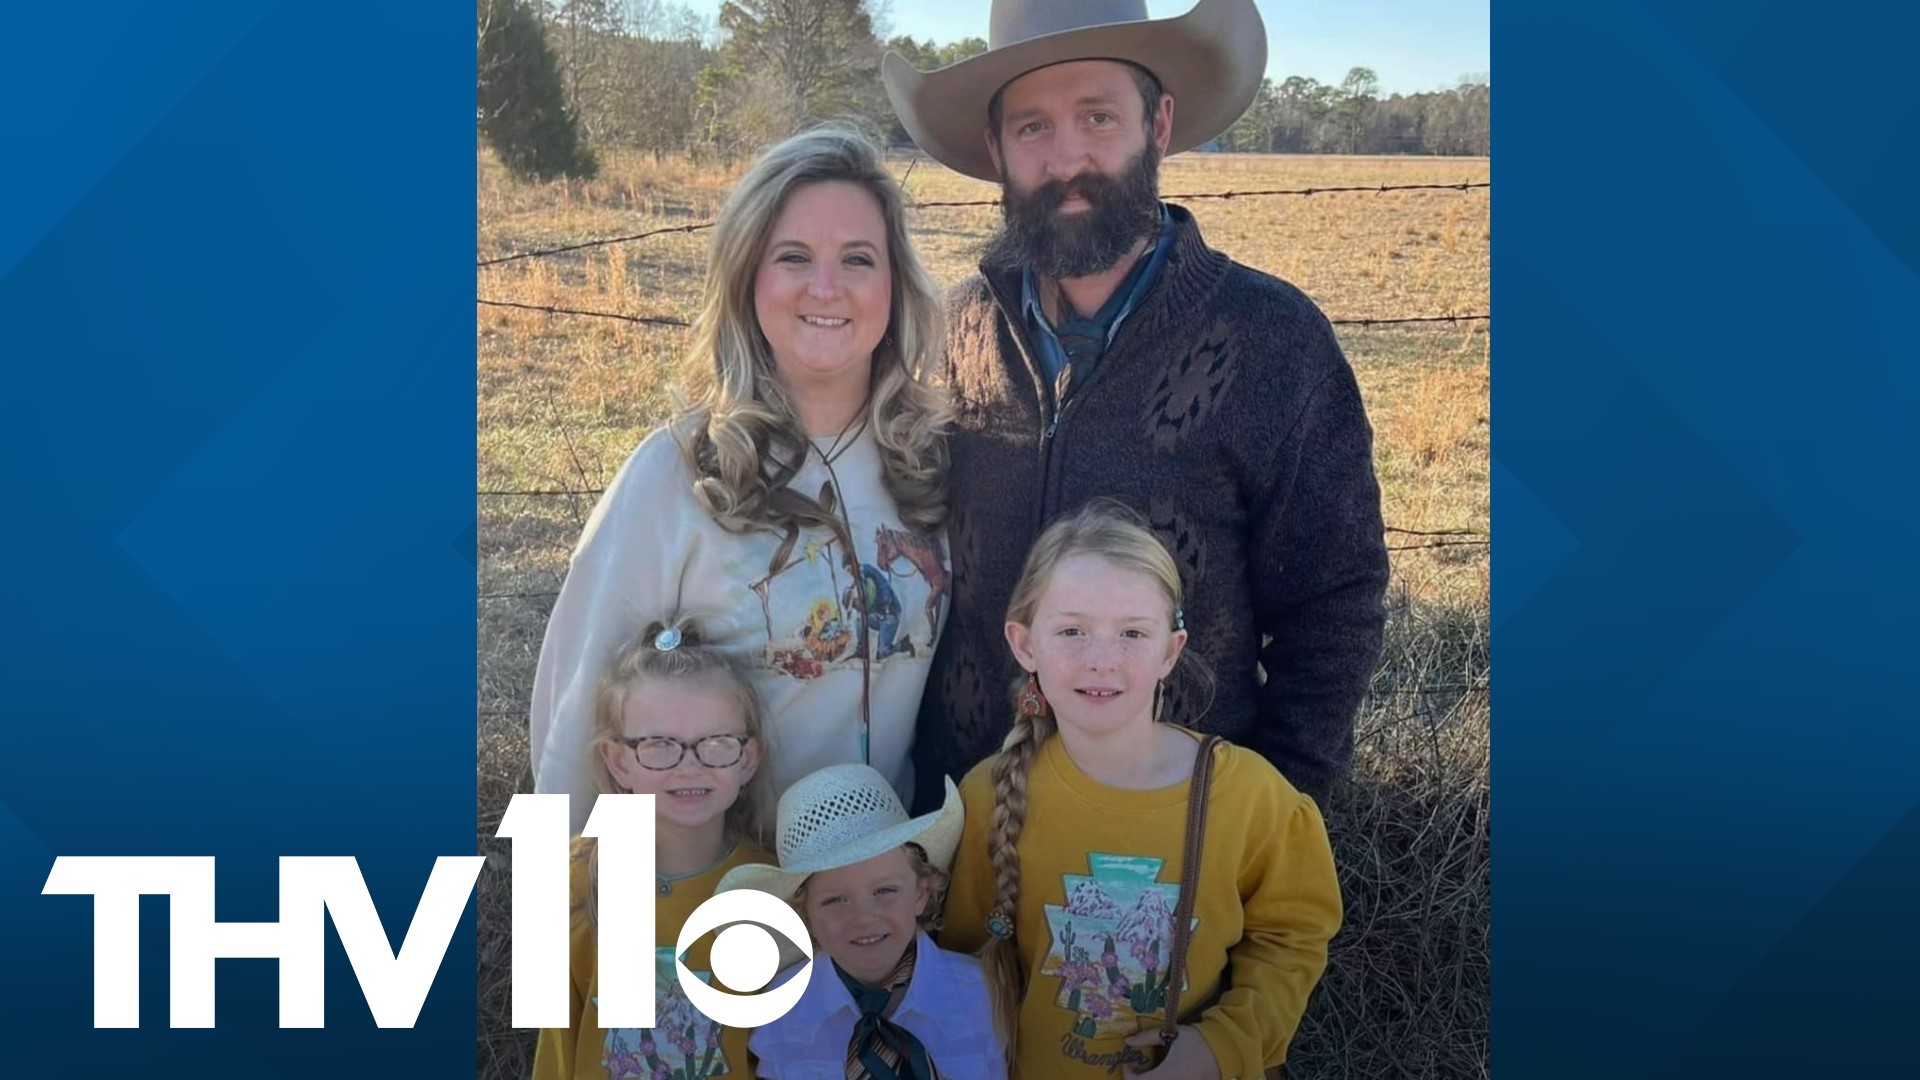 An Arkansas pastor and his son are in critical condition after their car was hit by a train. His two daughters, who were also in the car, died in the accident.